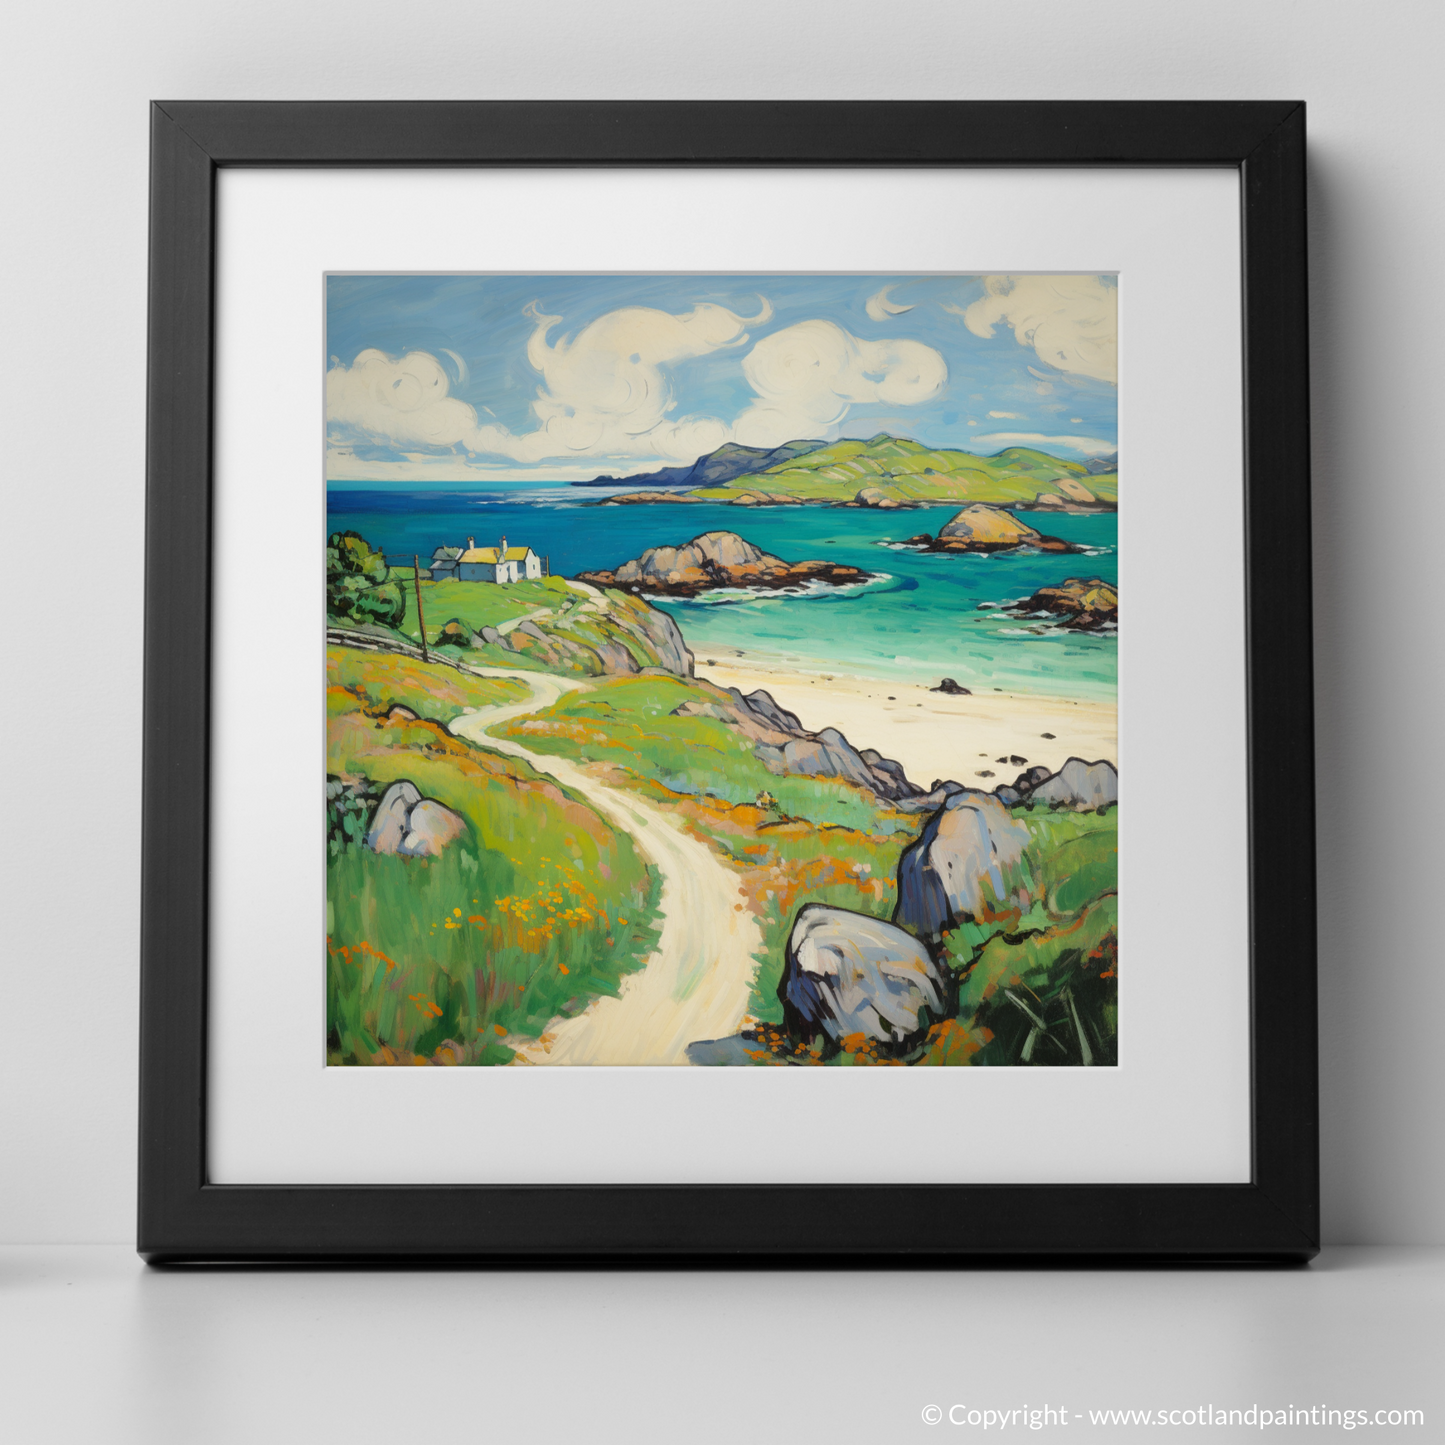 Art Print of Isle of Iona, Inner Hebrides in summer with a black frame